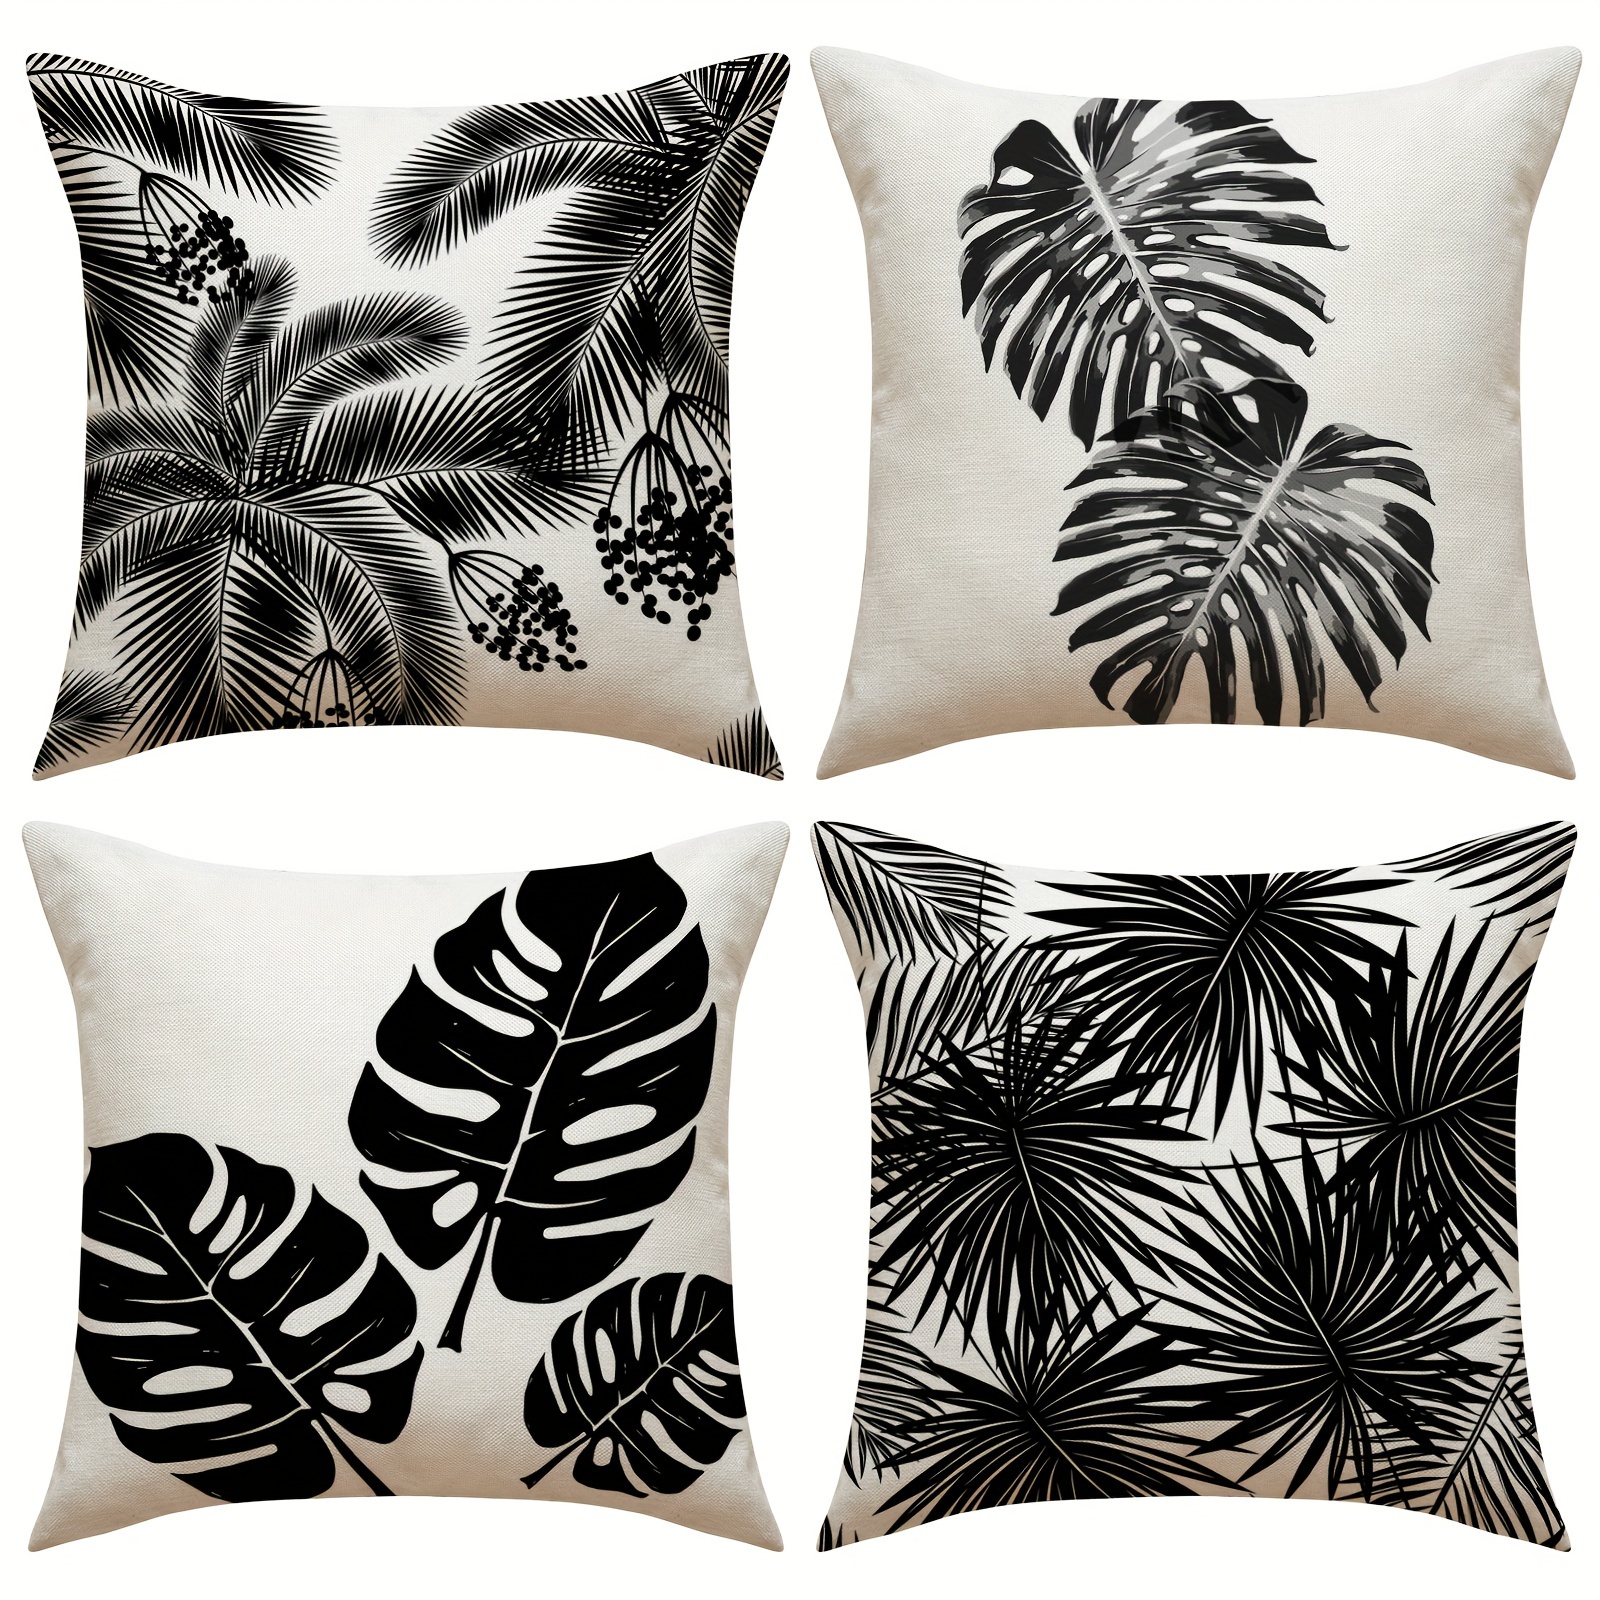 

4pcs Black And White Throw Pillow Covers Couch Decorative Inspirational Flower Pillow Case, Linen Cushion Case For Bed Sofa Chair Patio Outdoor Vintage Home Decor 18x18inch (no Pillow Insert)